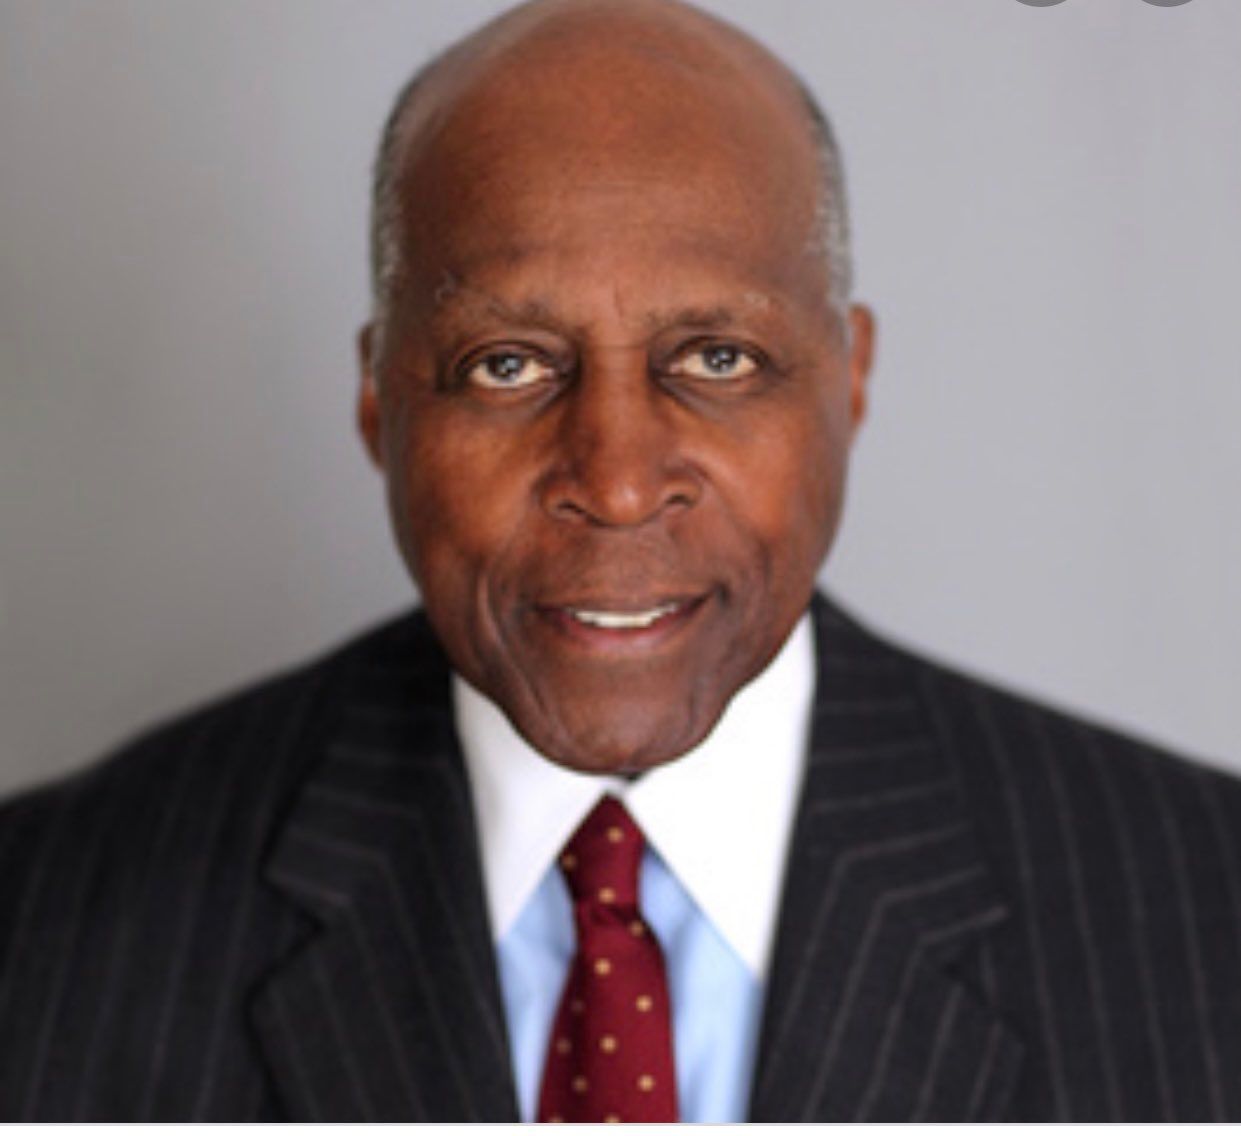 Vernon Jordan, US civil rights lawyer and former advisor to Bill Clinton, dies at 85